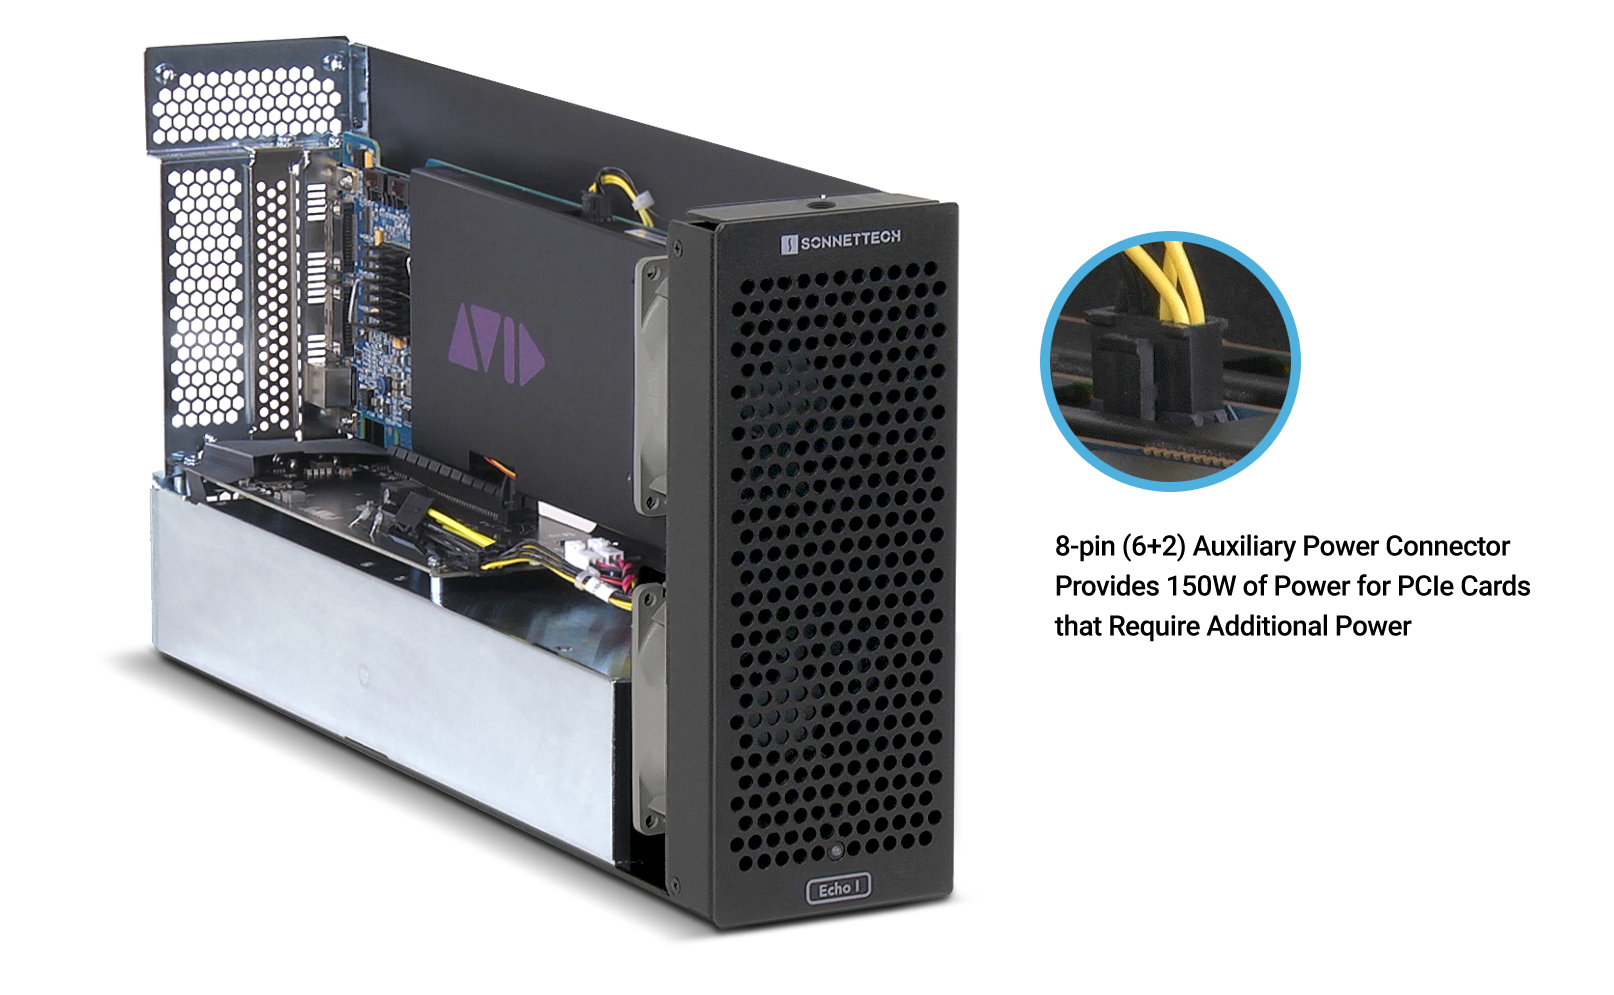 Echo 1 Desktop with Avid Pro Tools | HDX Card and Location of Auxiliary Power Connector